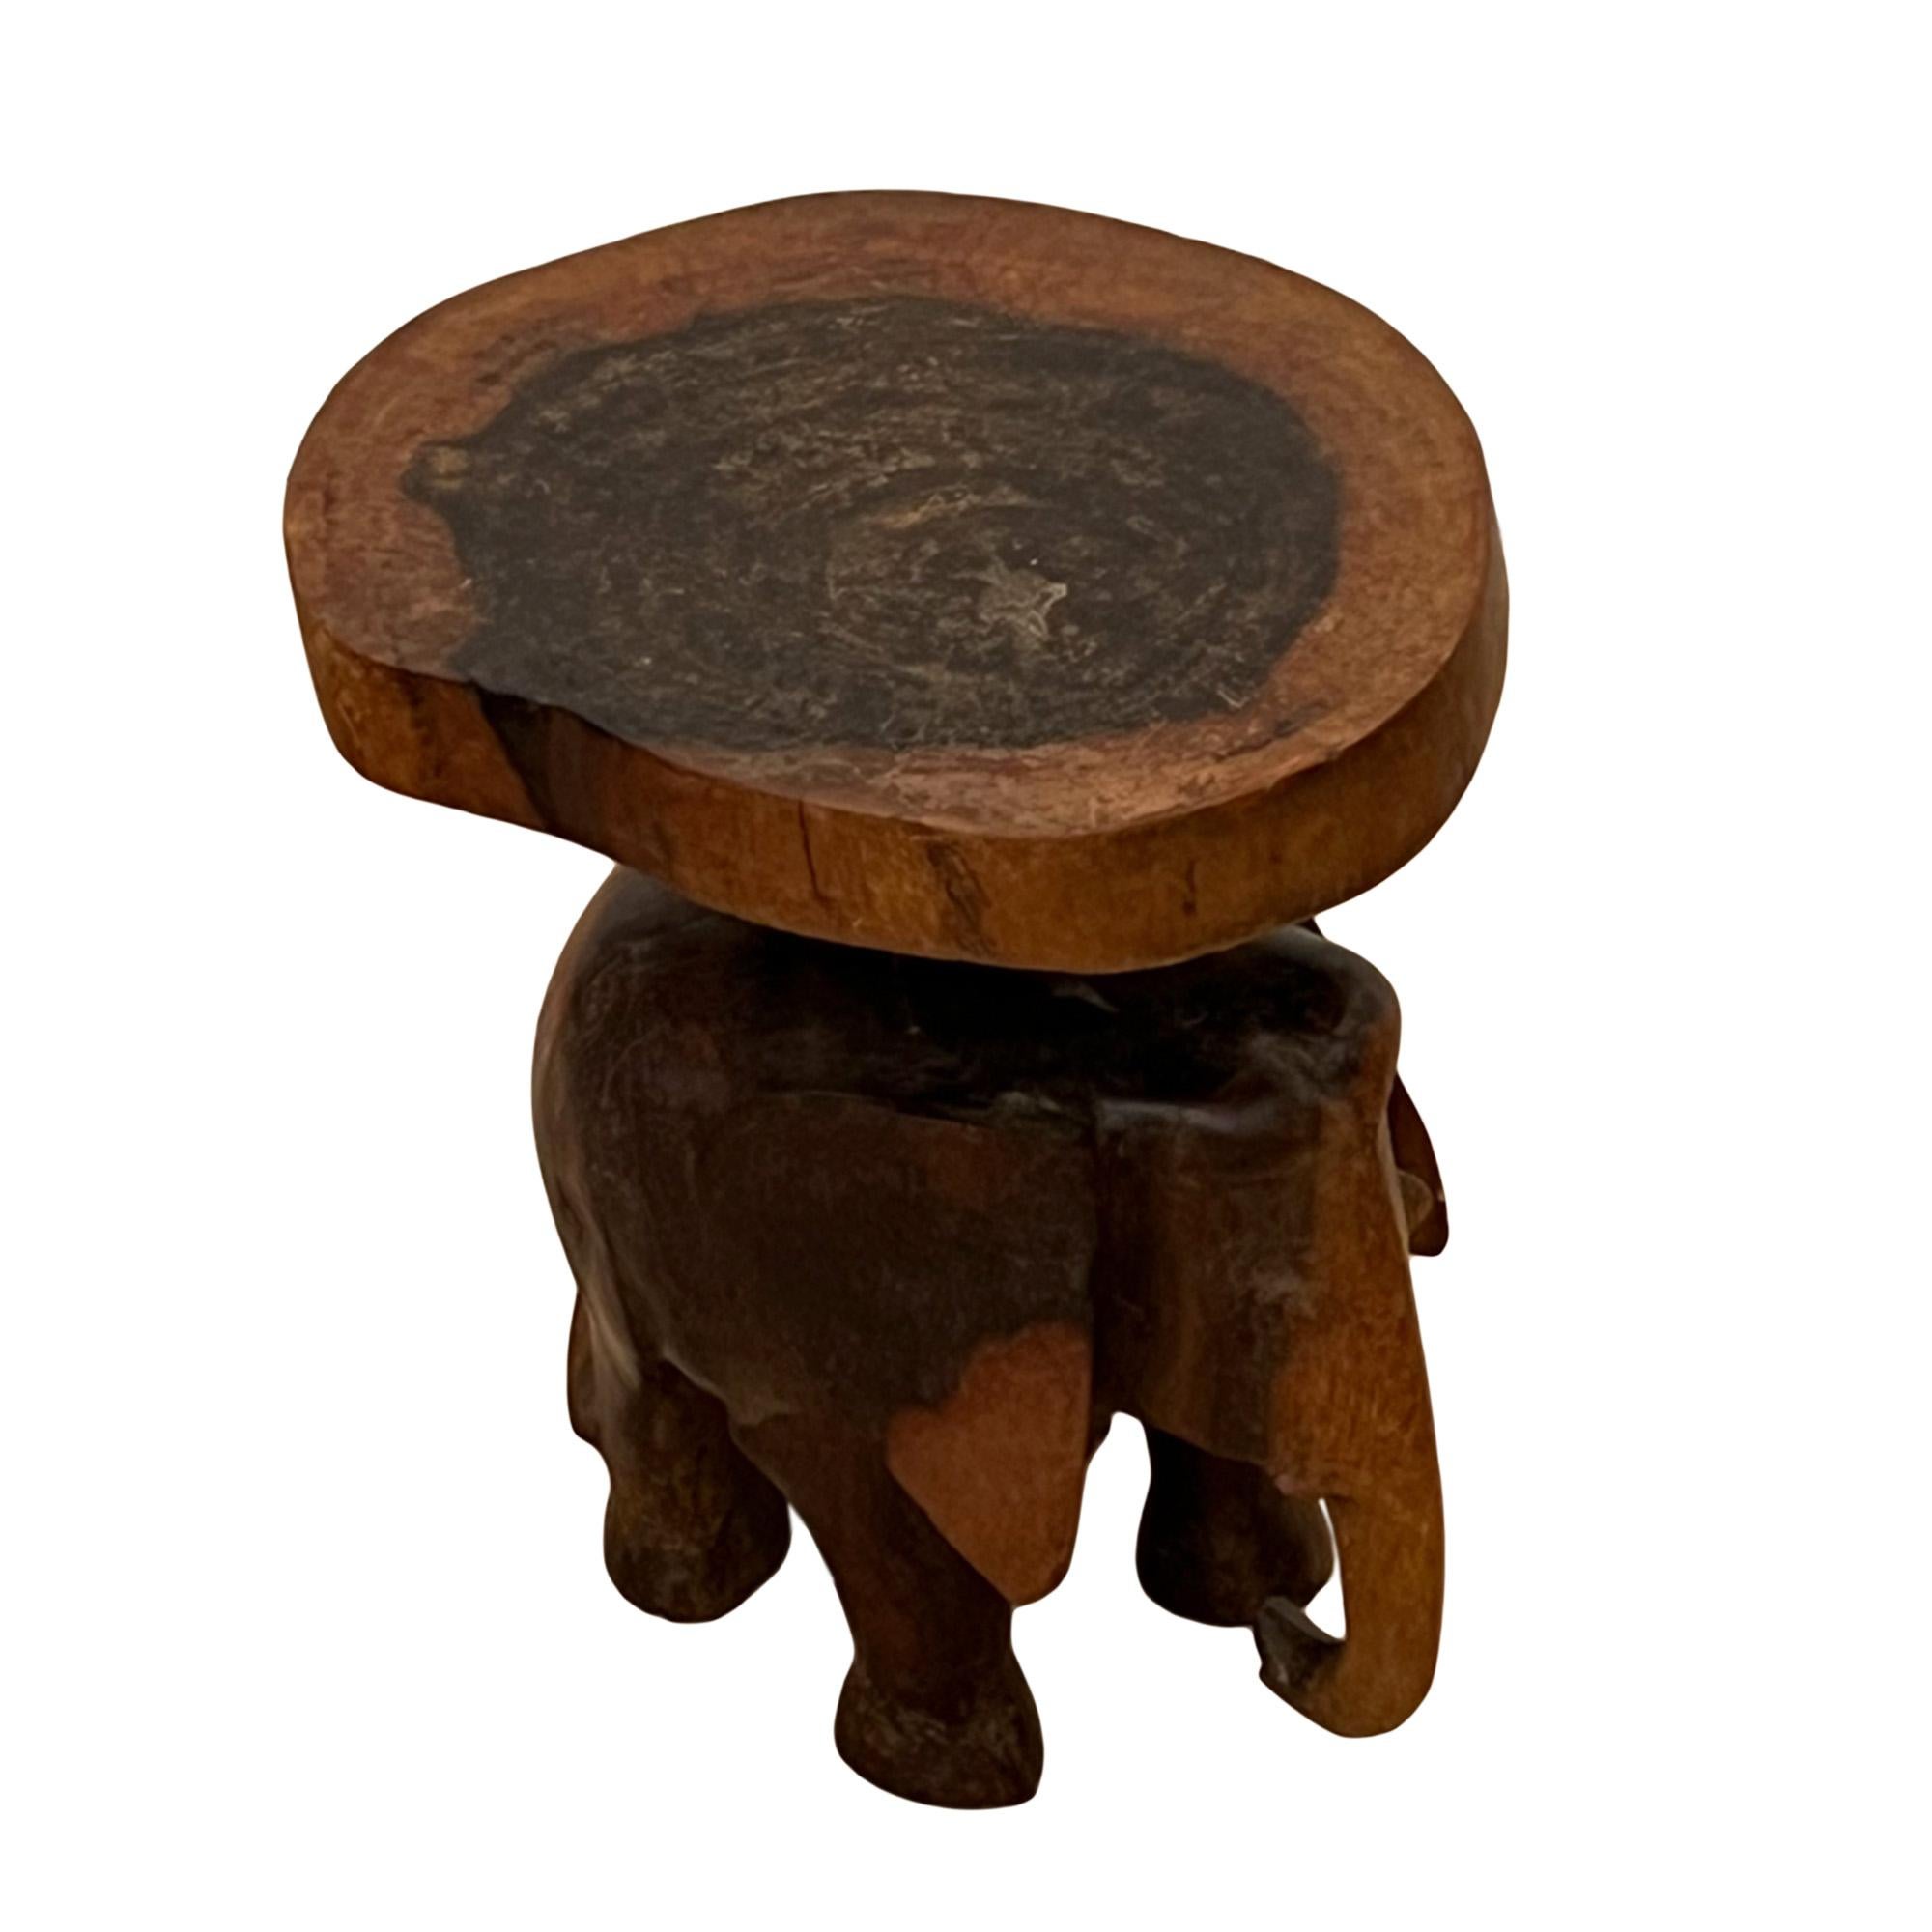 This quirky little side table was carved from padauk wood in Ceylon in the 1950s. 

Please take a look at all the pictures to see the detail of the small elephant - decorative and practical!

A lovely addition to a child's bedroom or nursery.